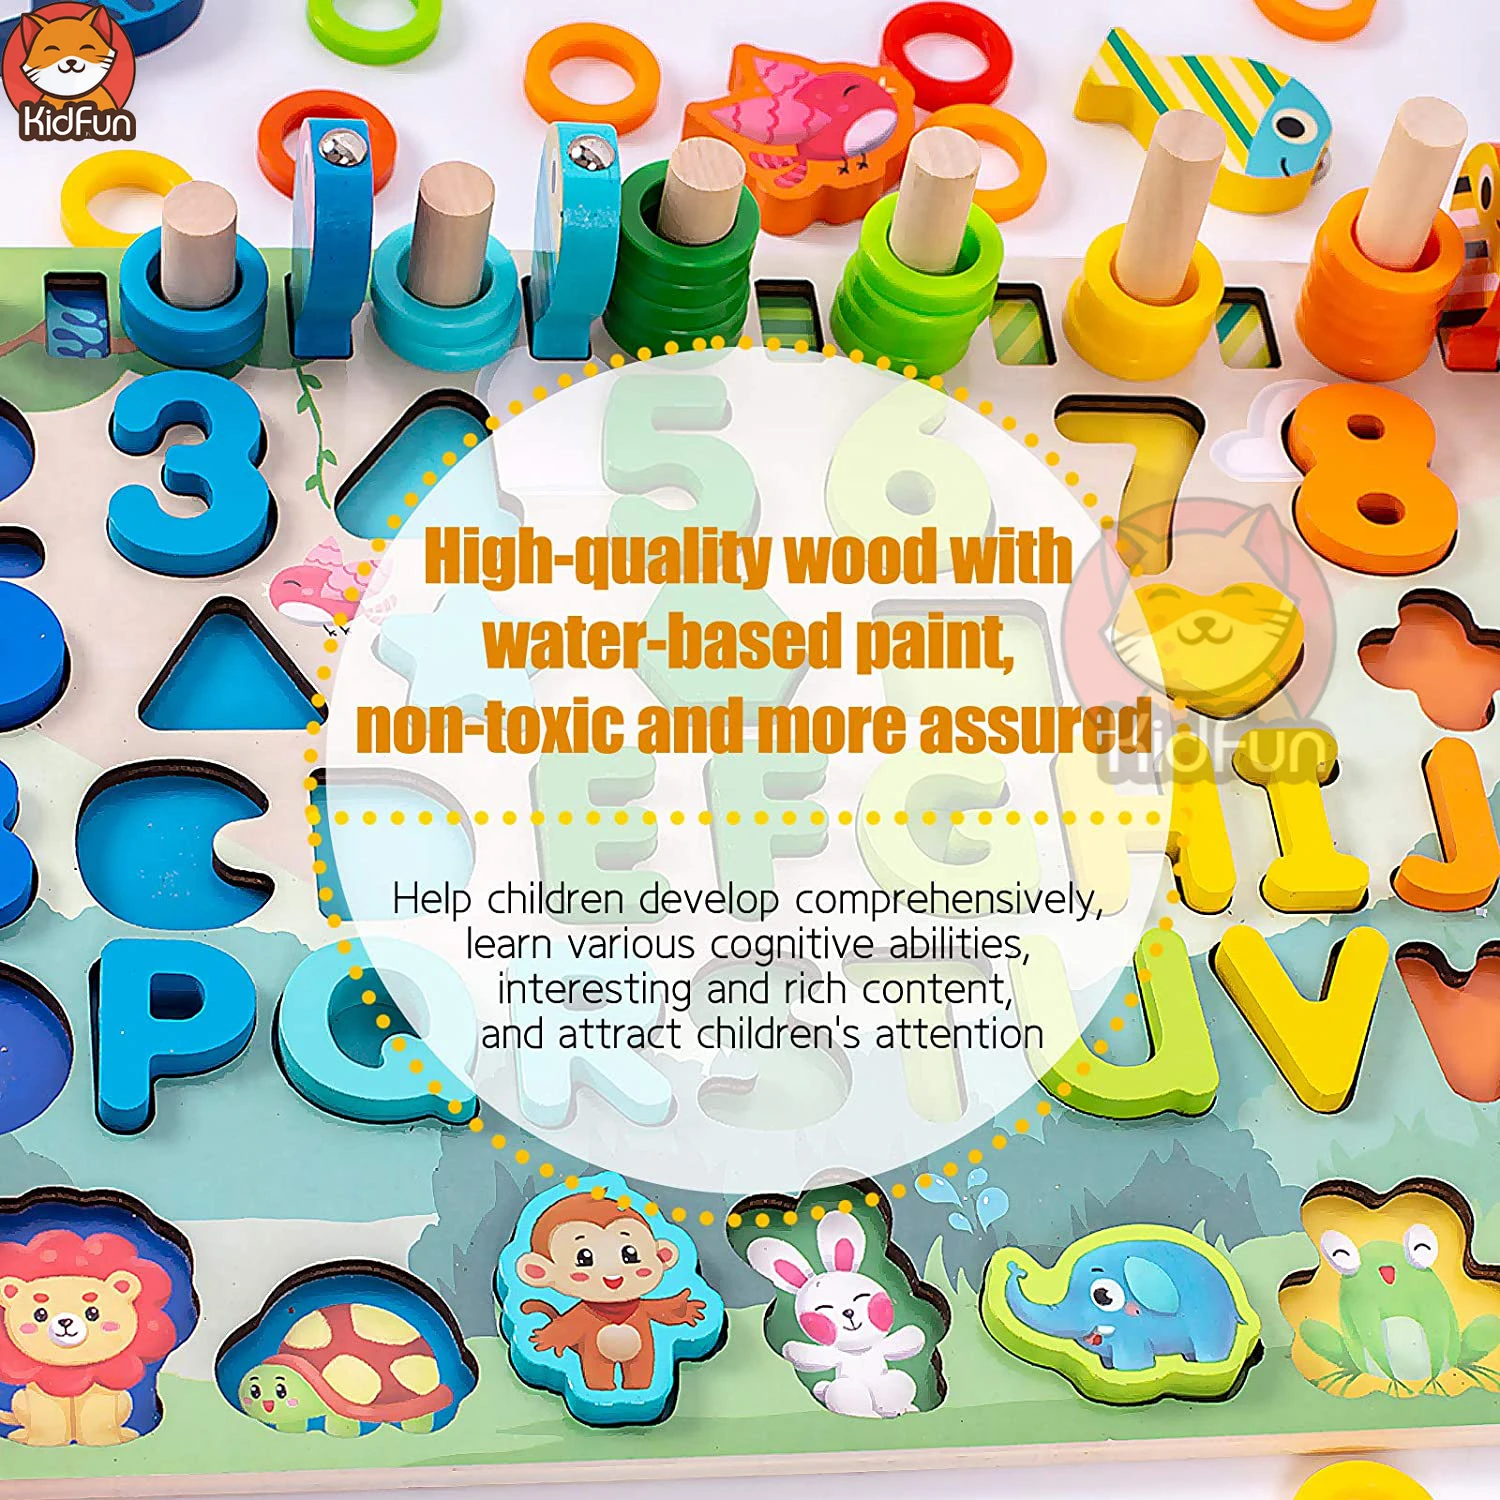 montessori toys educational wooden toys for kids babies montessori toys board math fishing game montessori toys for 1 2 3 years free global shipping